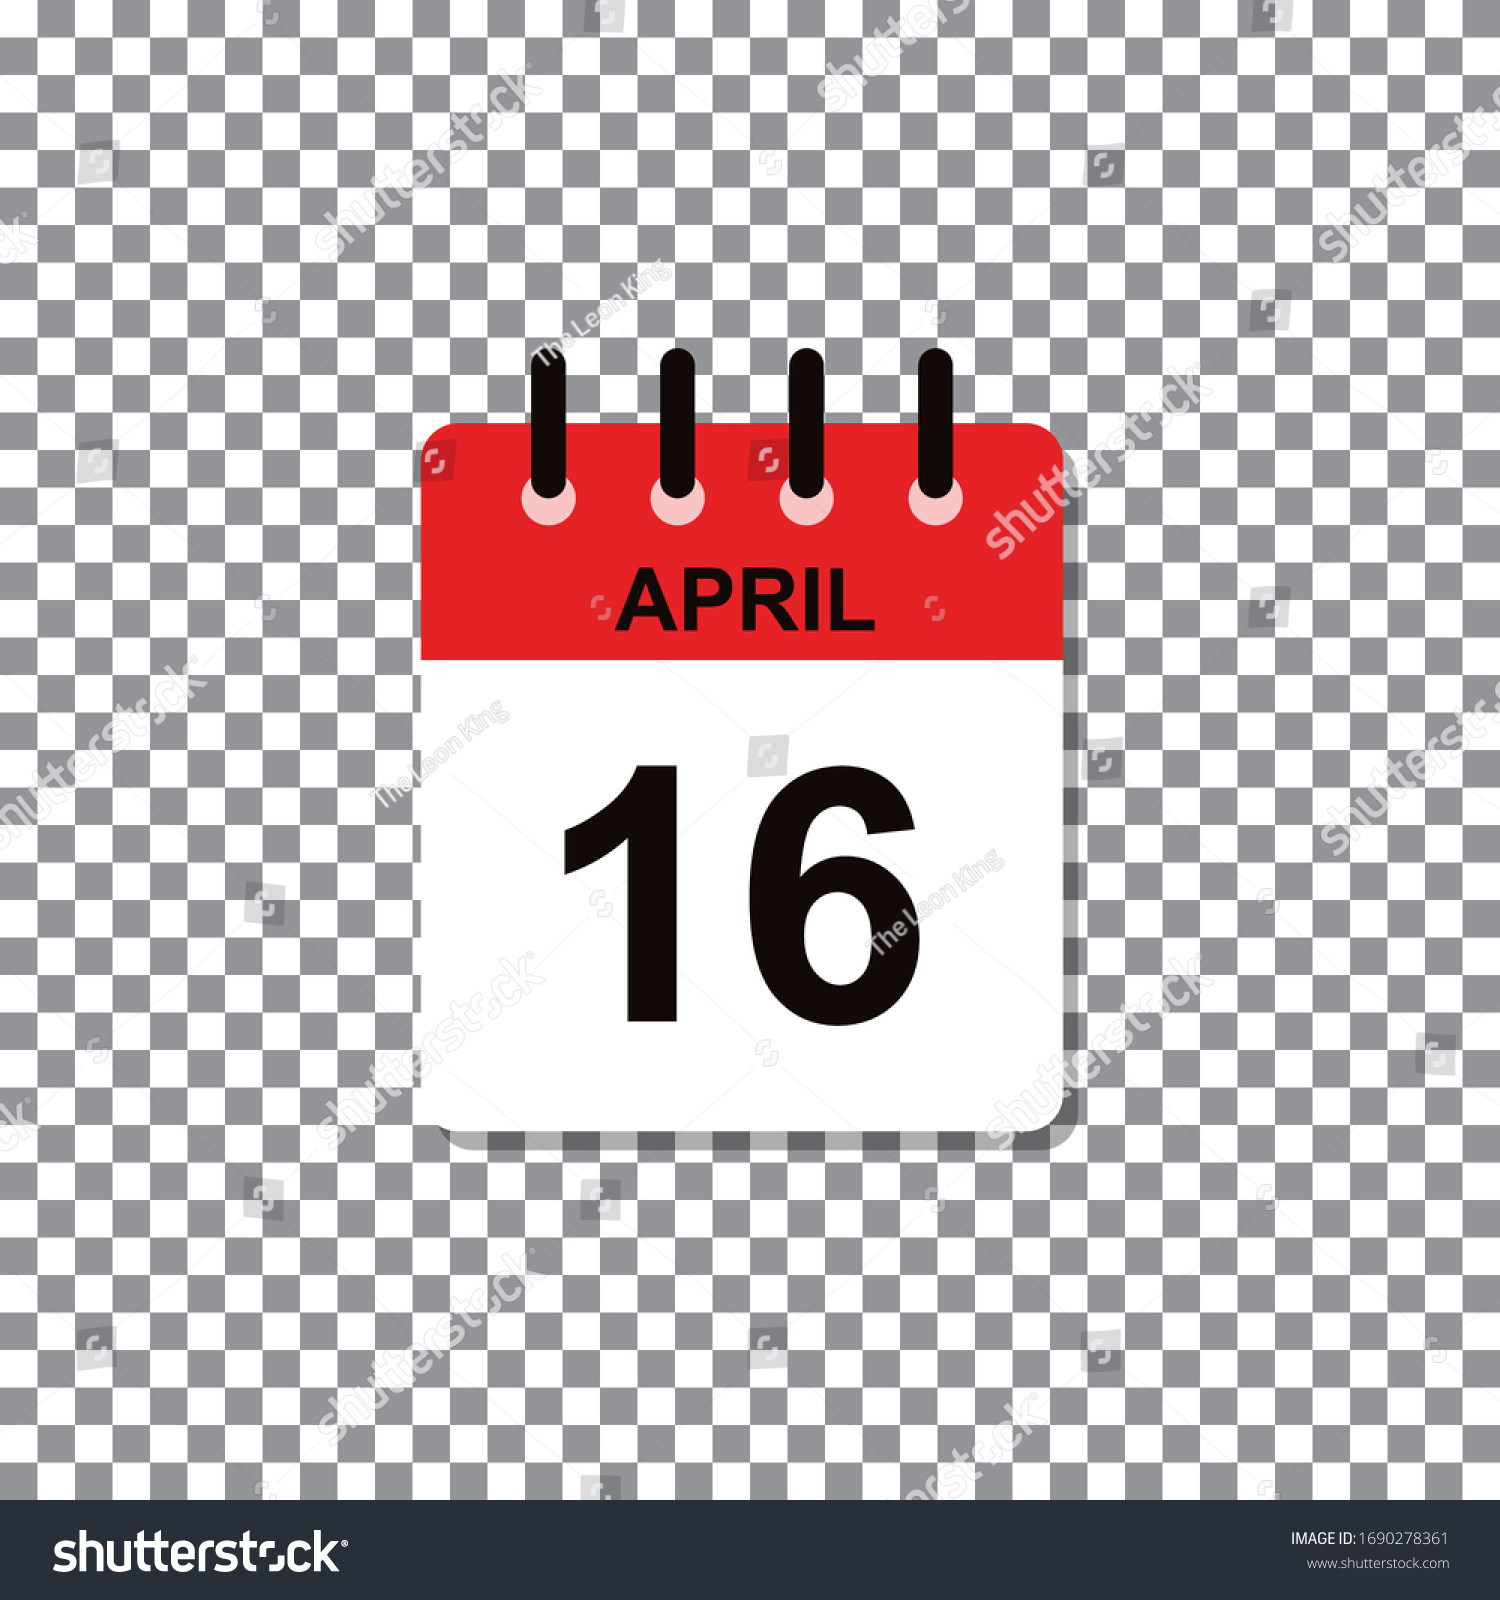 April 16th Calendar Day Month Vector Stock Vector (Royalty Free